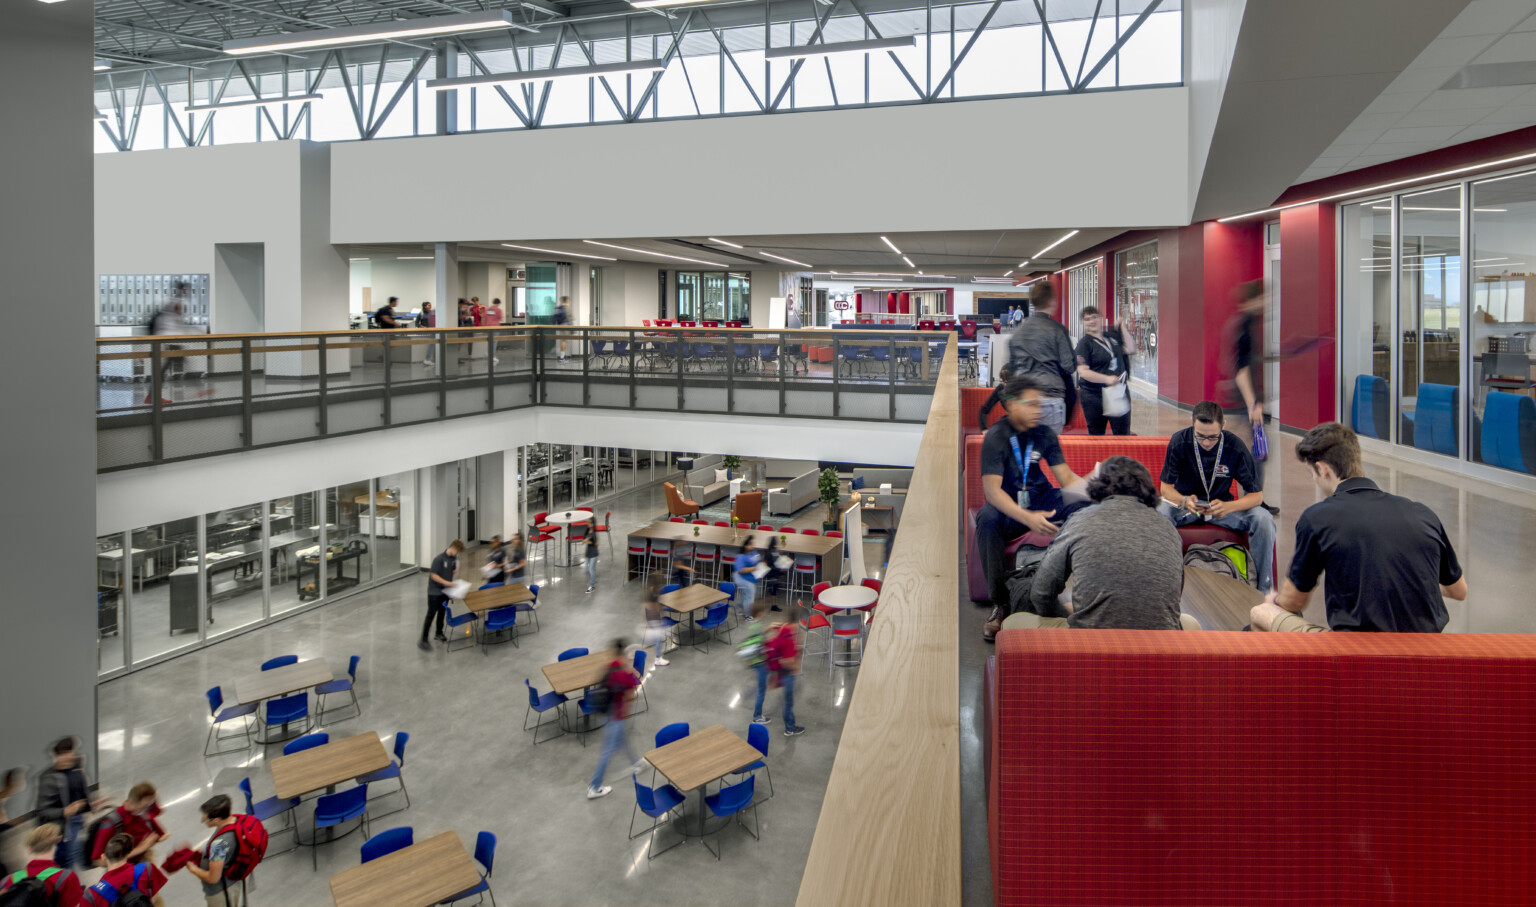 View of a common area filled with tables and blue chairs from the second floor standing by a red couch in a area filled with students